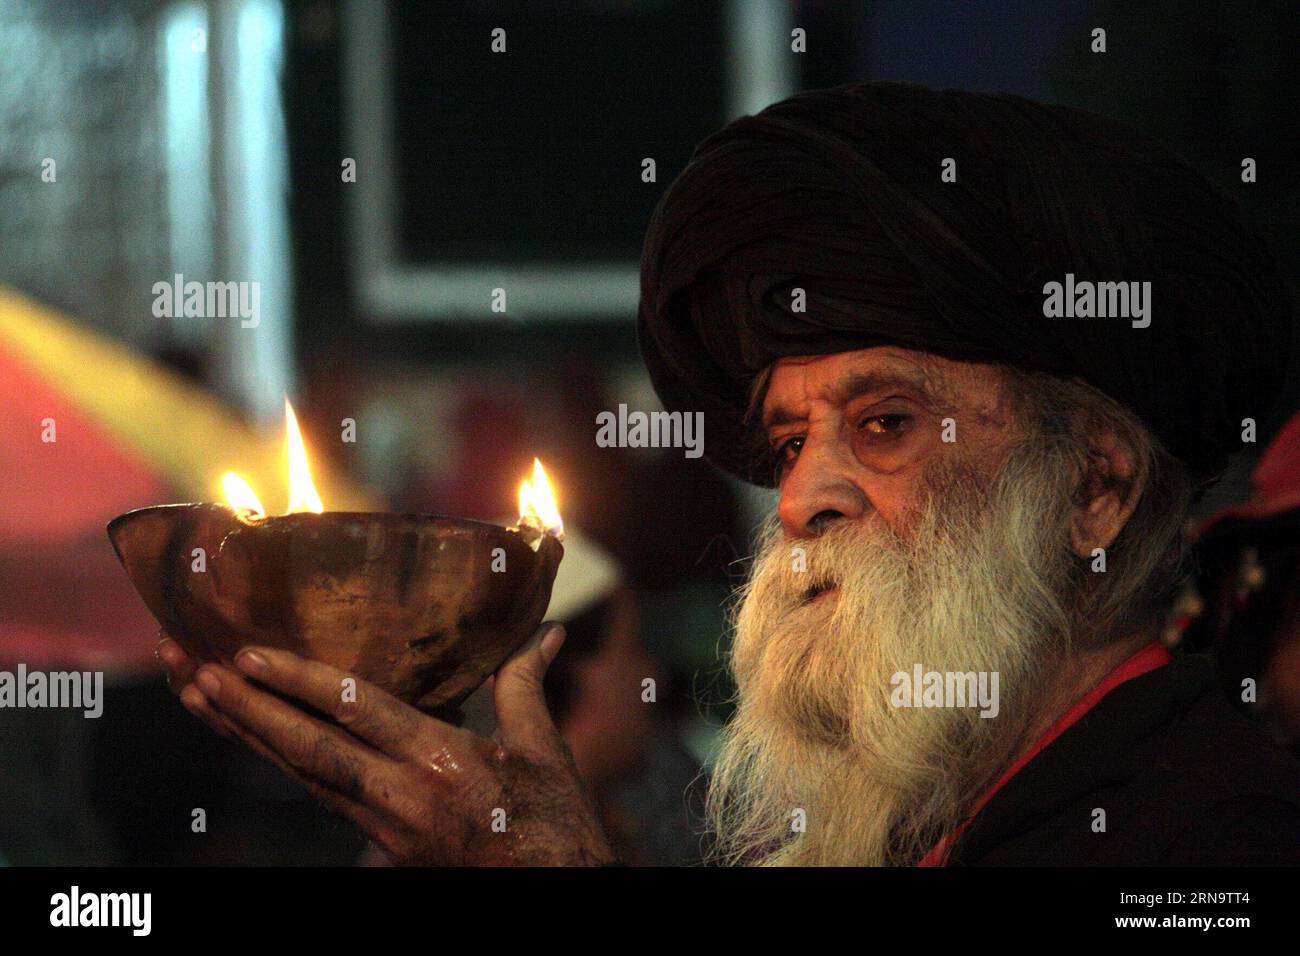 (151220) -- LAHORE, Dec. 19, 2015 -- A Muslim devotee holds an oil lamp at the shrine of the Sufi saint Mian Mir Sahib during a festival to mark the saint s death anniversary in eastern Pakistan s Lahore, Dec. 19, 2015. Hundreds of devotees are attending the two-day festival. ) PAKISTAN-LAHORE-RELIGIOUS FESTIVAL JamilxAhmed PUBLICATIONxNOTxINxCHN   151220 Lahore DEC 19 2015 a Muslim devotee holds to Oil Lamp AT The Shrine of The Sufi Saint Mian me Sahib during a Festival to Mark The Saint S Death Anniversary in Eastern Pakistan S Lahore DEC 19 2015 hundreds of devotees are attending The Two Da Stock Photo